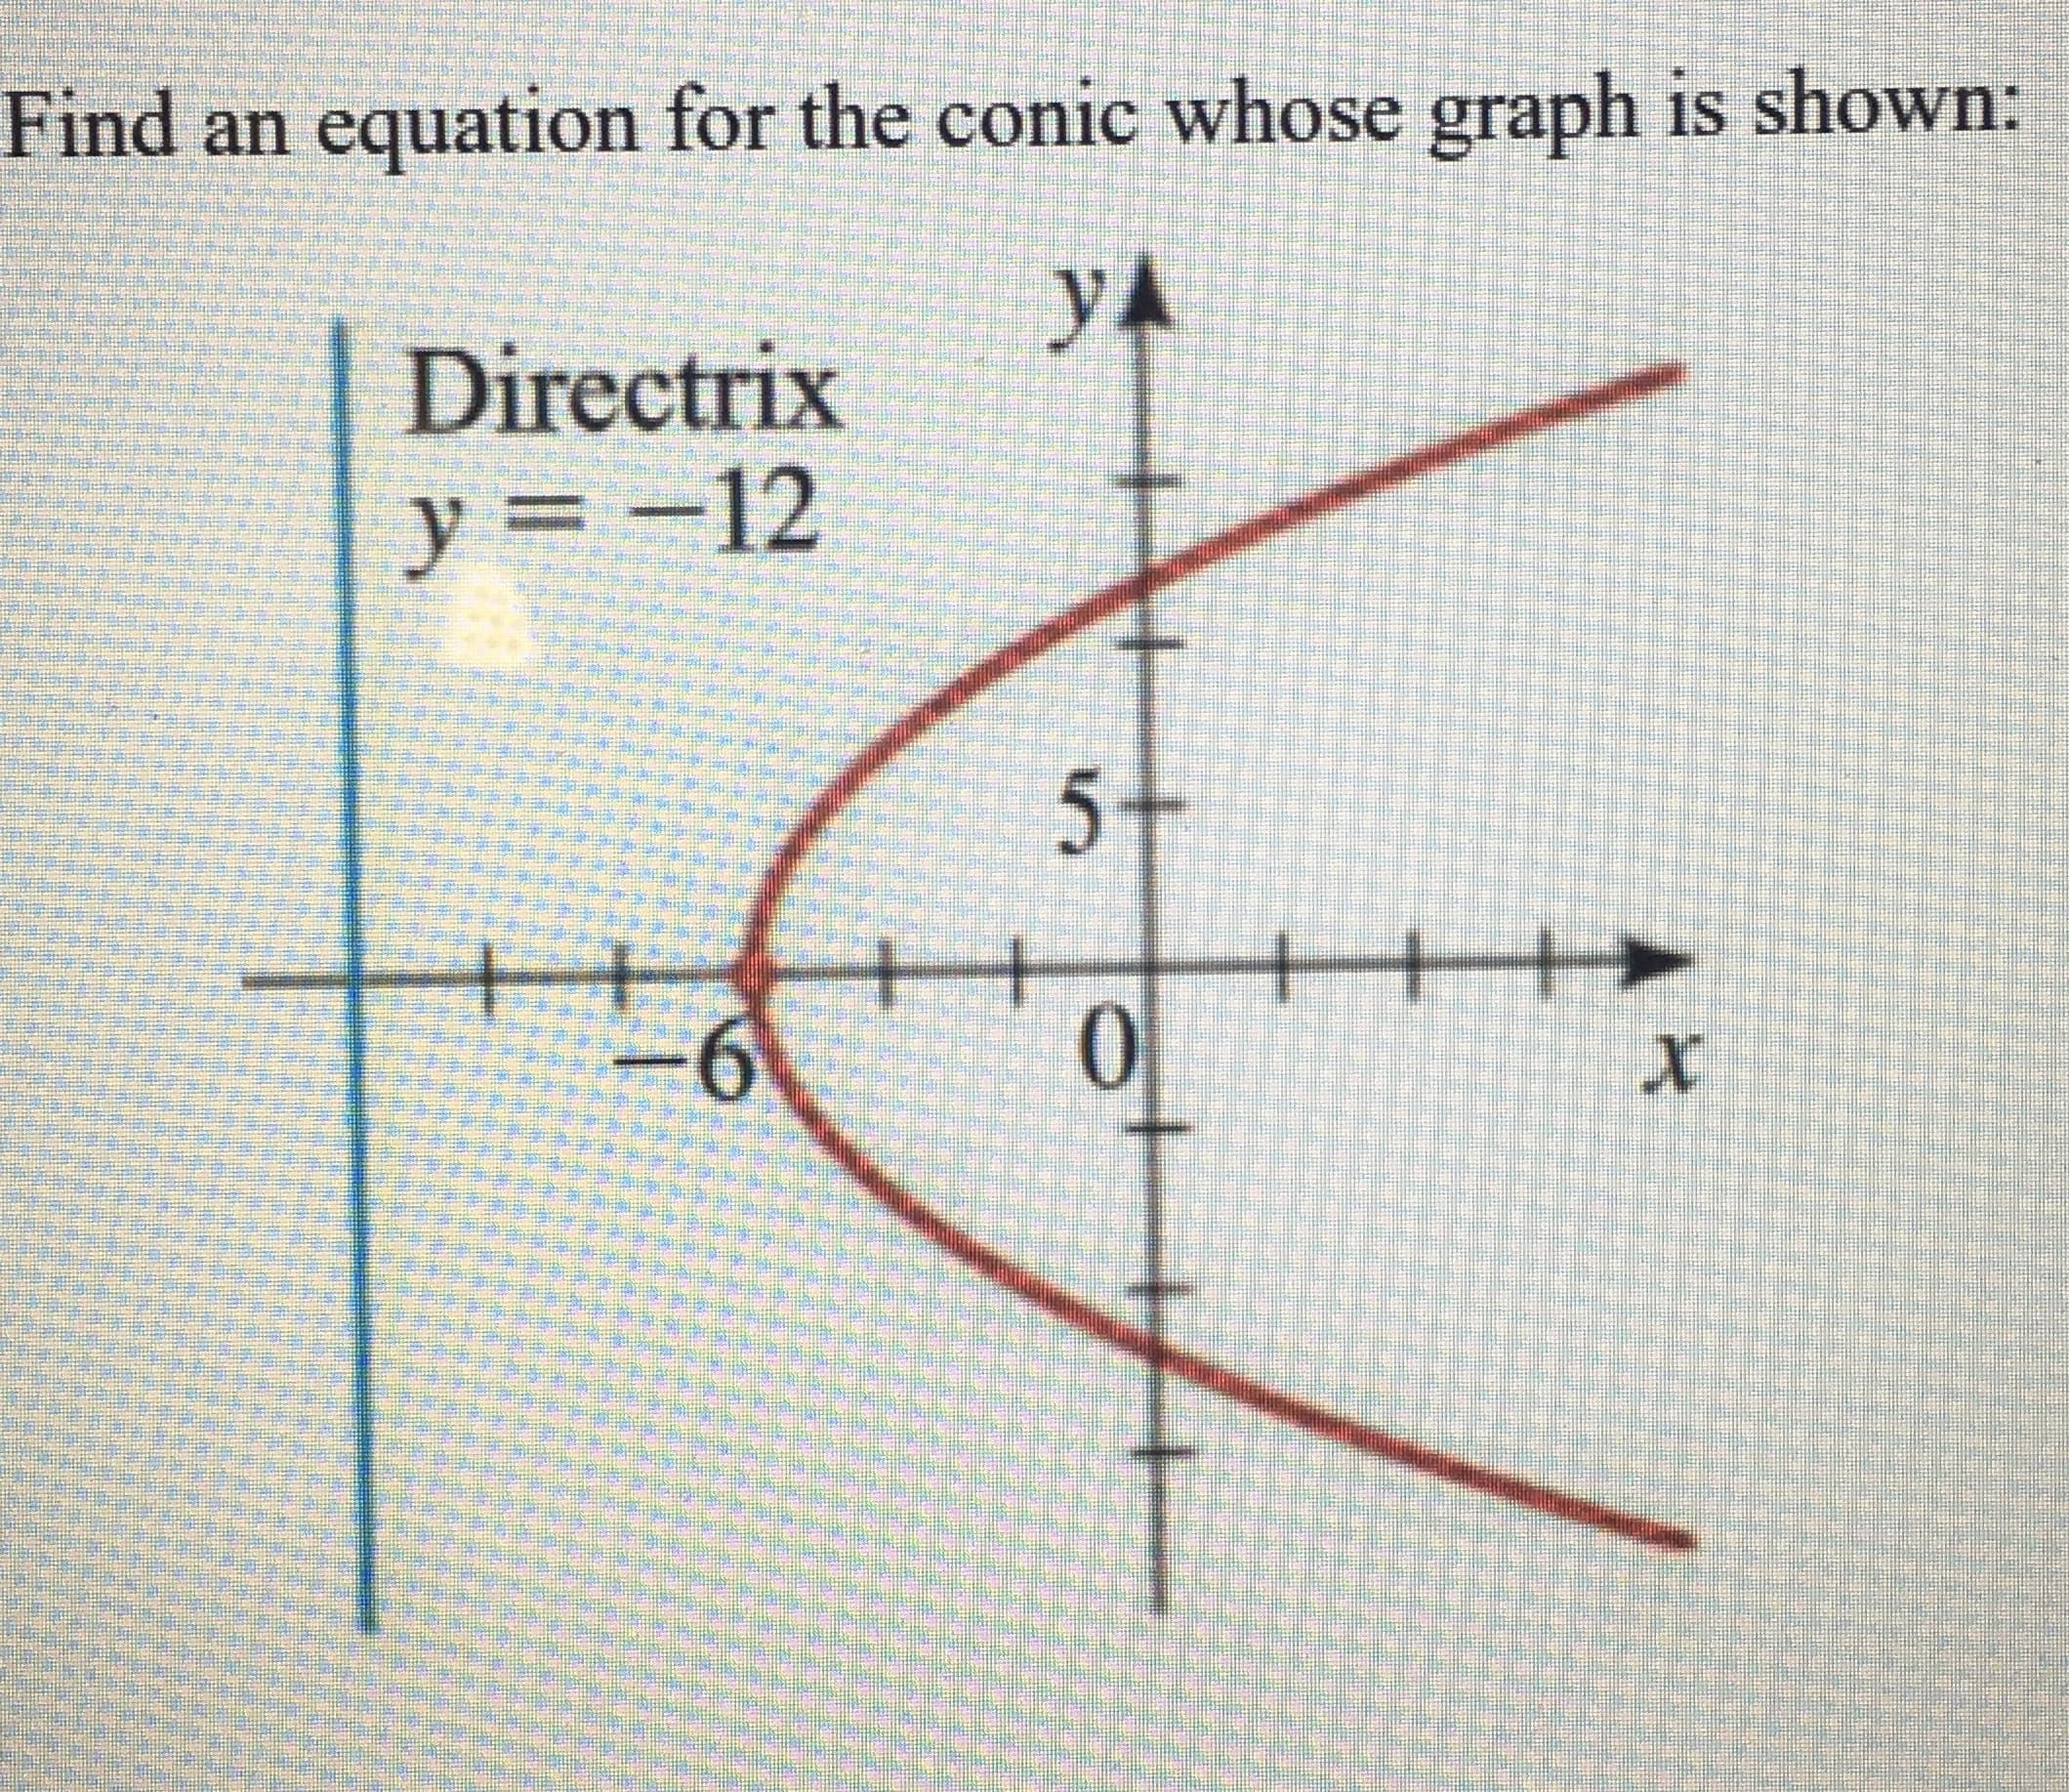 Find an equation for the conic whose graph is shown:
yA
Directrix
y = -12
